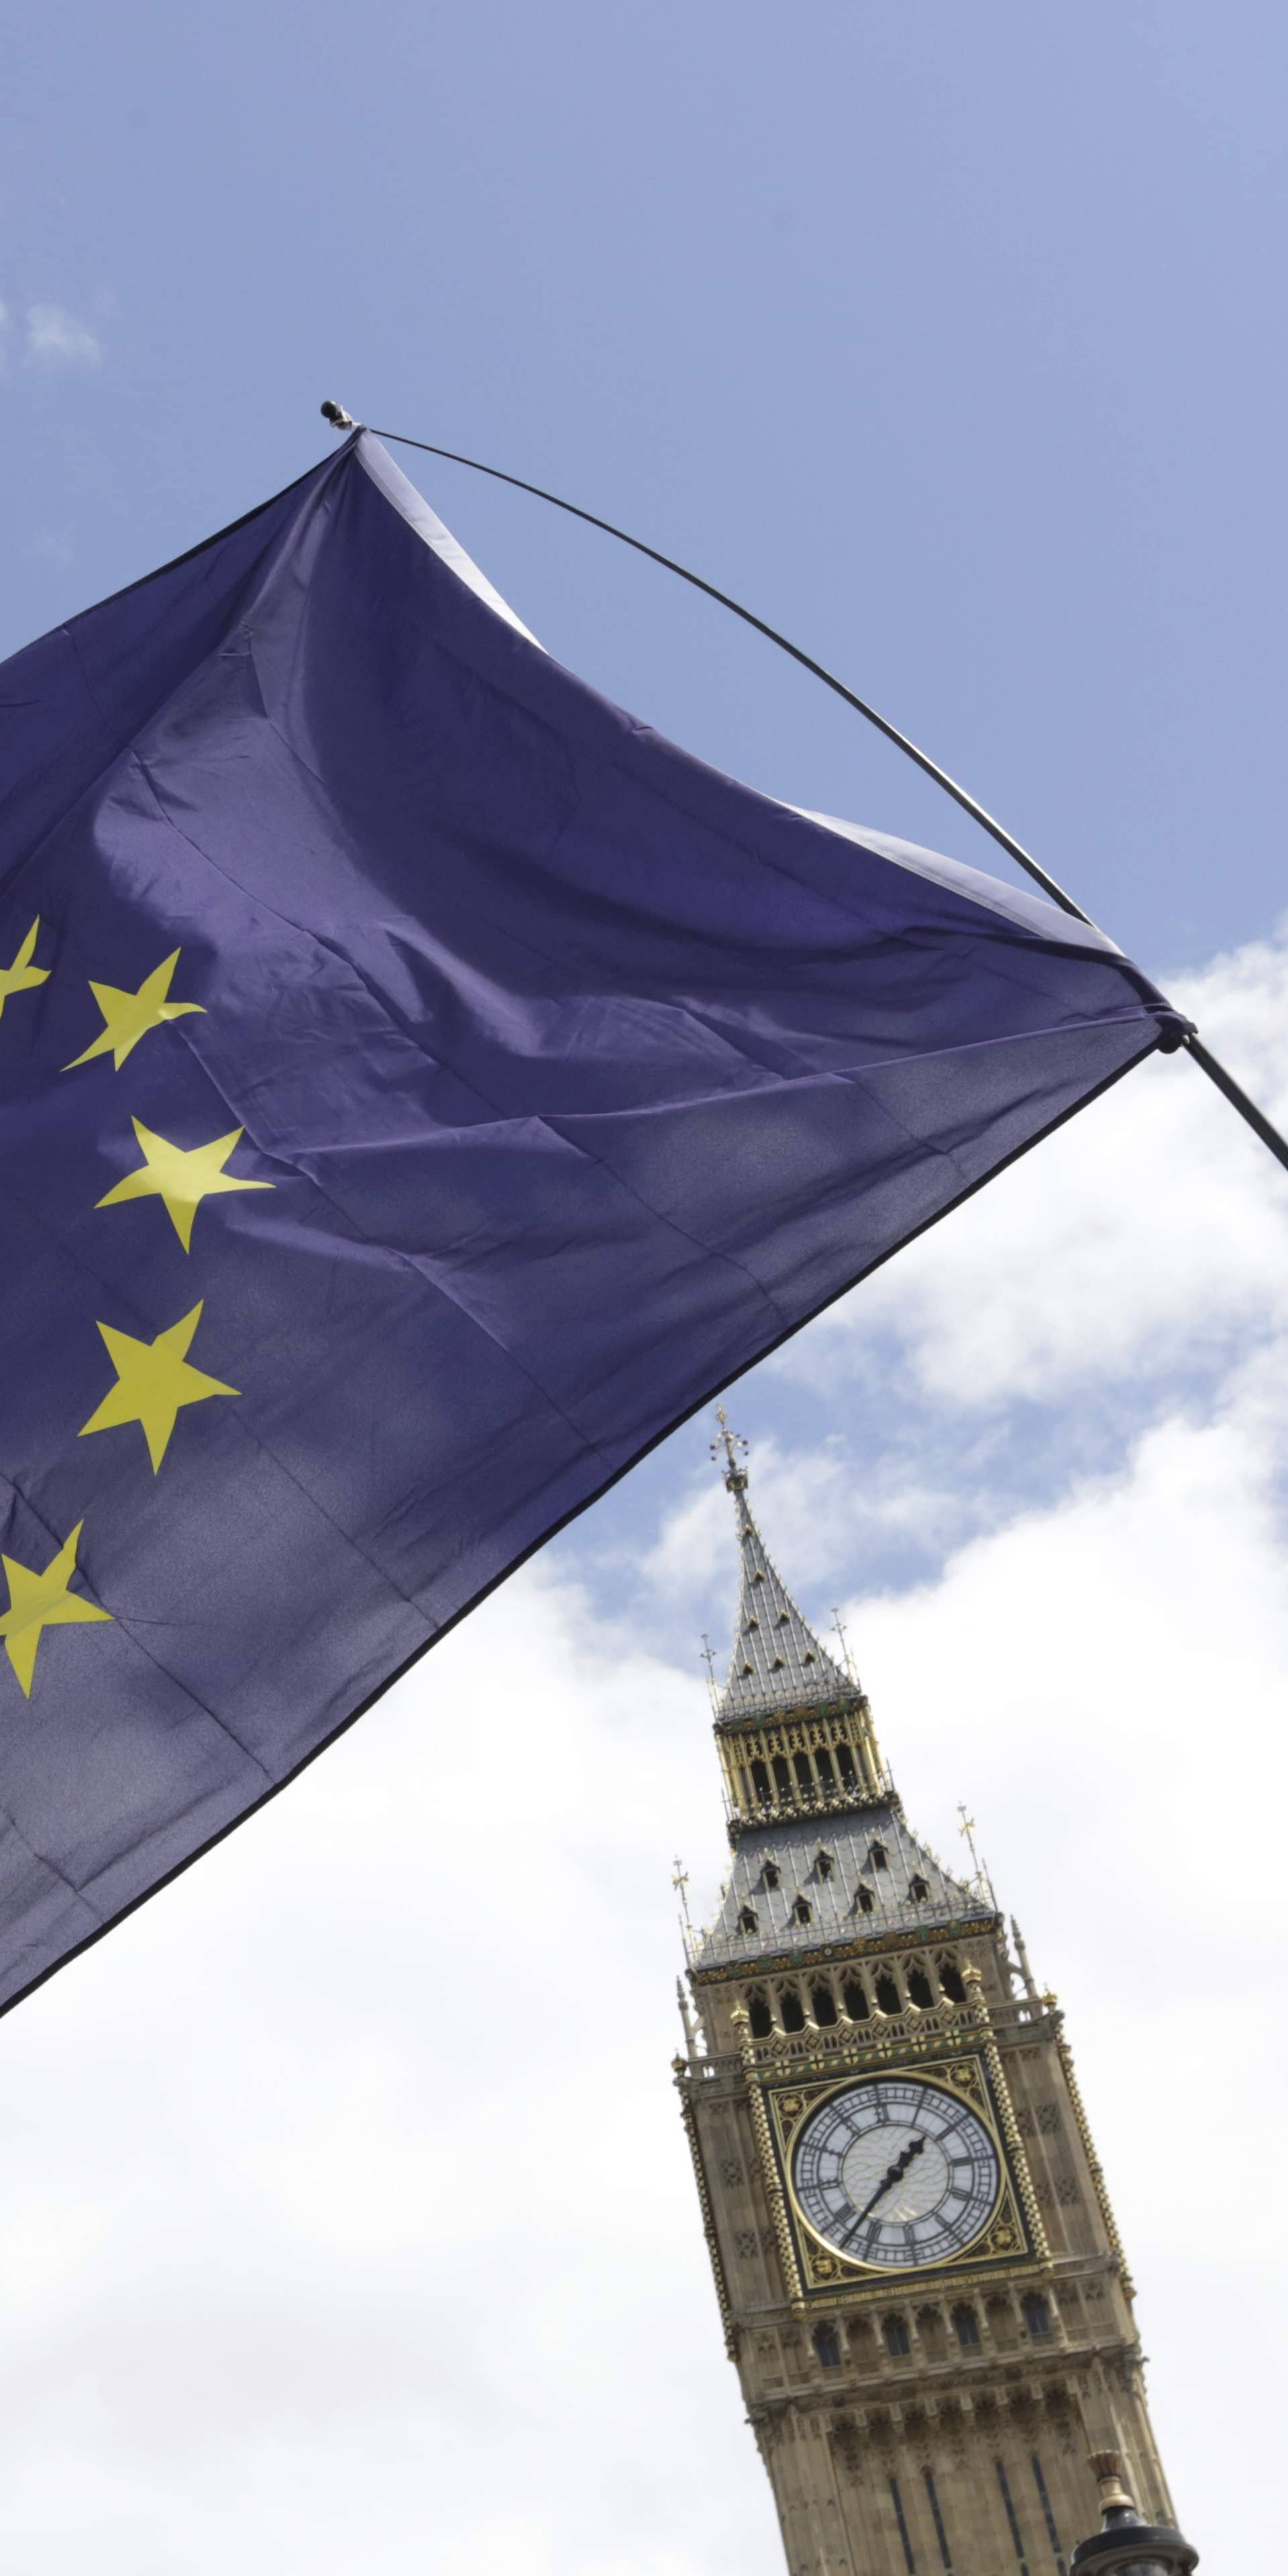 A European Union flag is held in front of the Big Ben clock tower in Parliament Square during a 'March for Europe' demonstration against Britain's decision to leave the European Union, central London